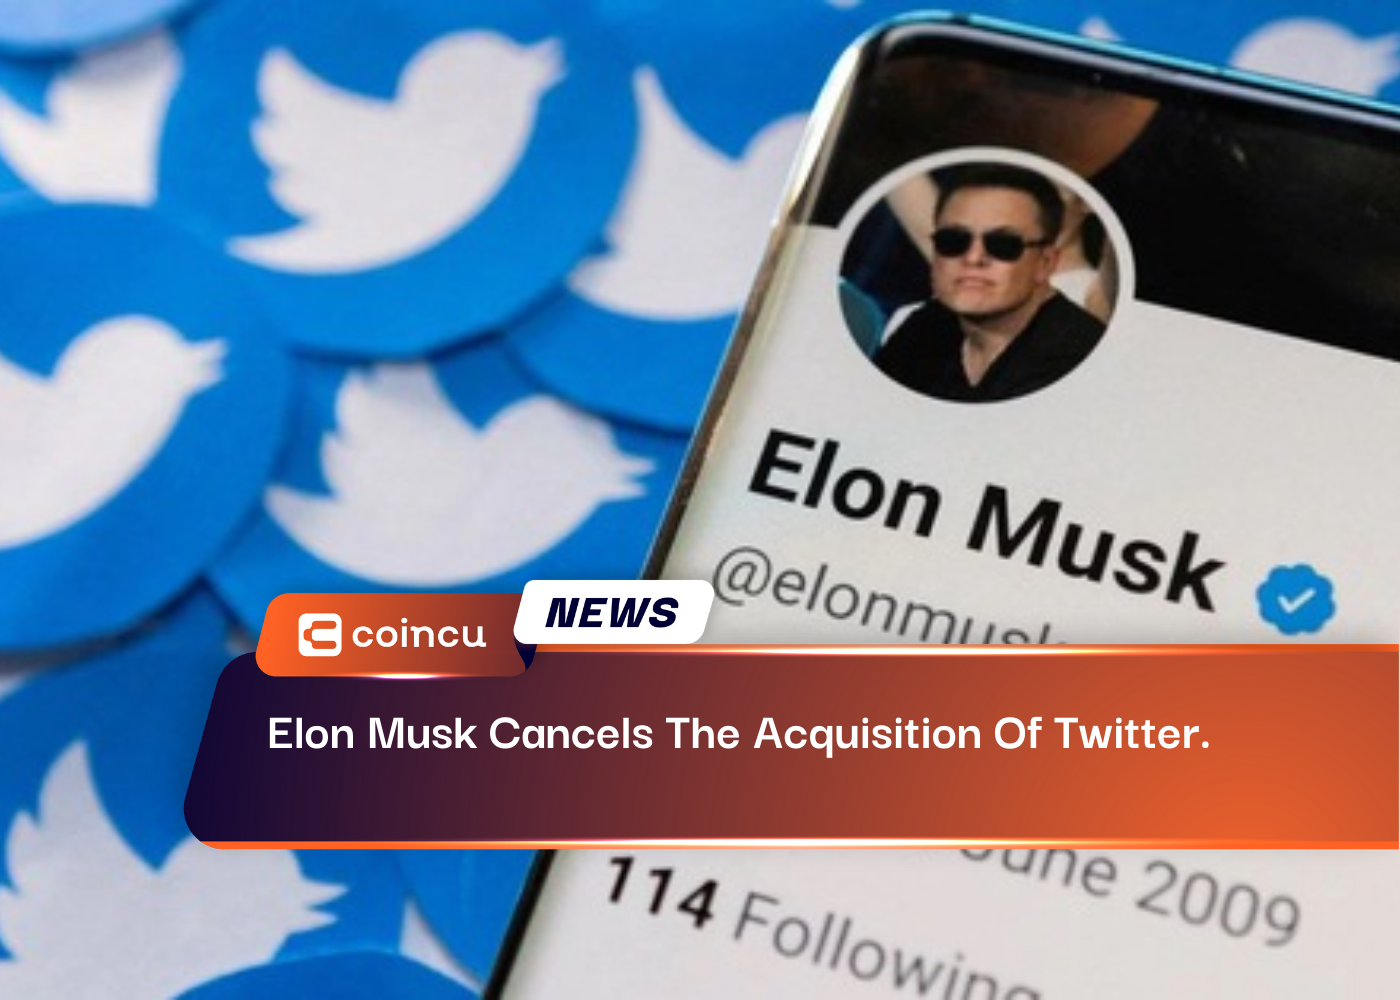 Elon Musk Cancels The Acquisition Of Twitter.